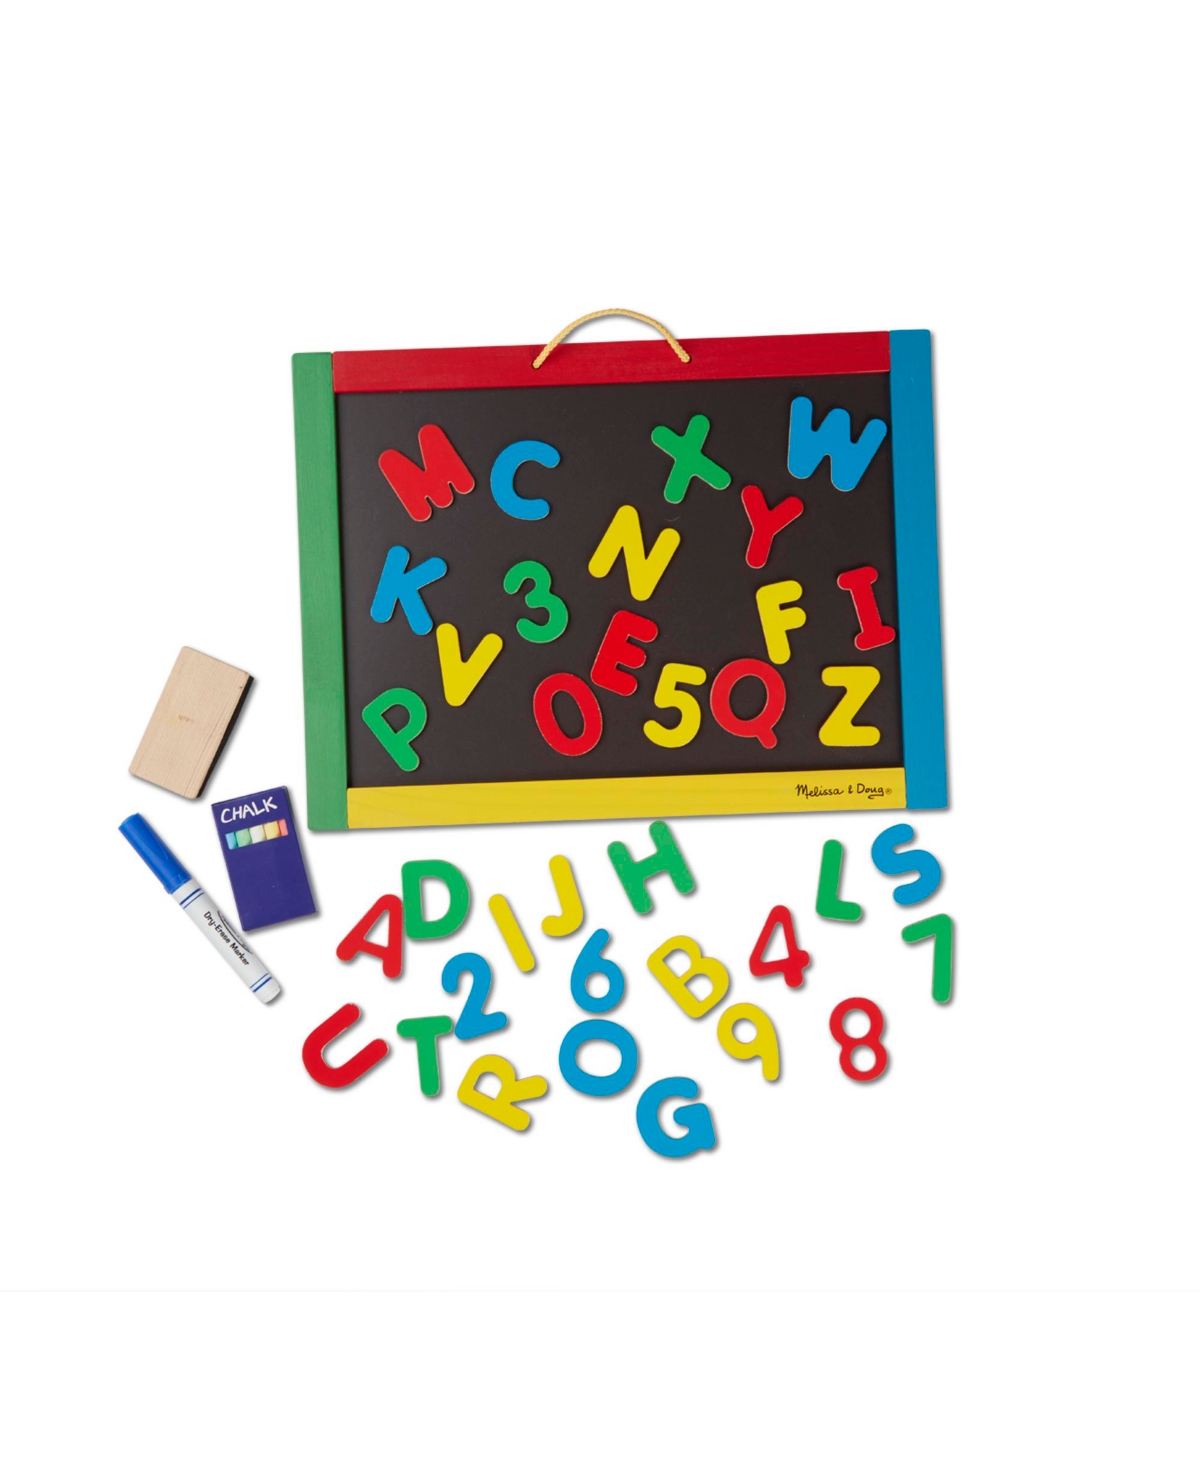 Melissa & Doug Kids'  Magnetic Chalkboard And Dry-erase Board With 36 Magnets, Chalk, Eraser, And Dry-erase In Multi